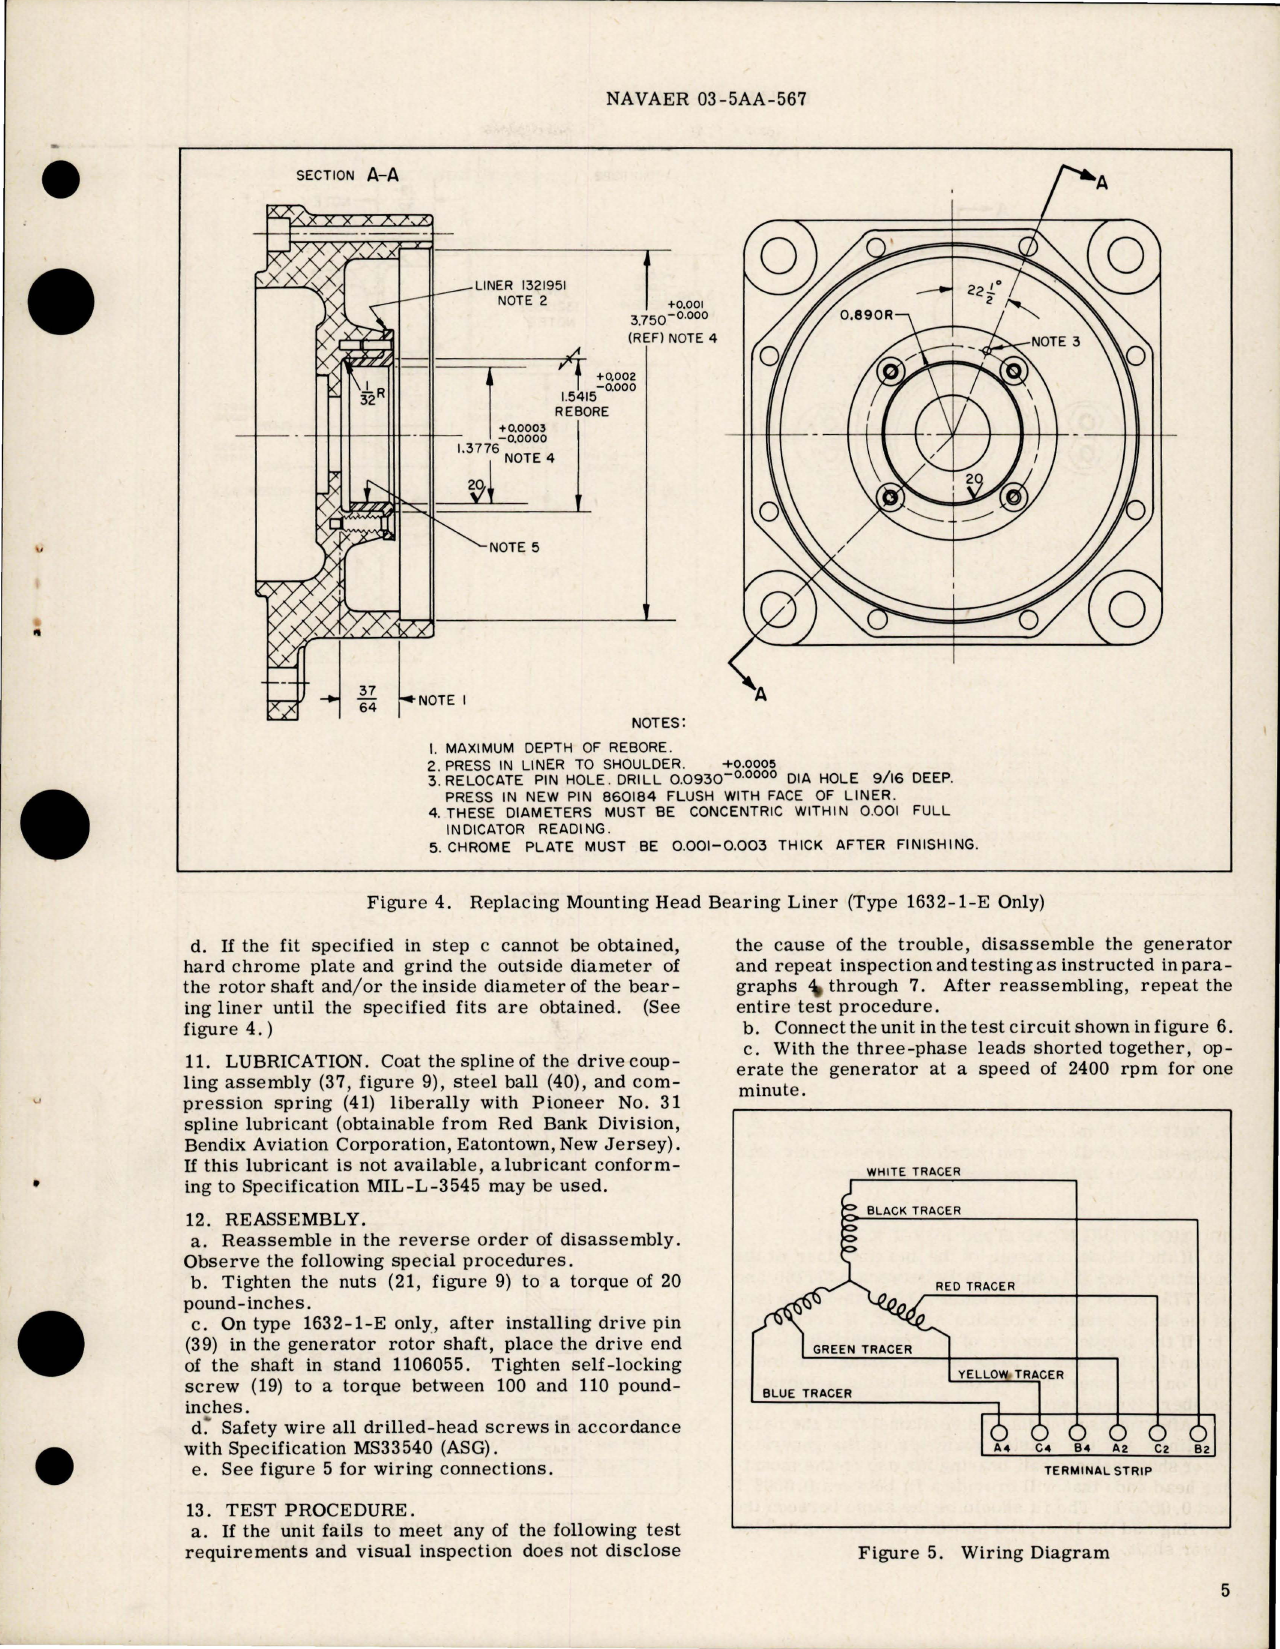 Sample page 5 from AirCorps Library document: Overhaul Instructions with Parts Breakdown for Alternating Current Generator - Types 1632-1-A and 1632-1-E